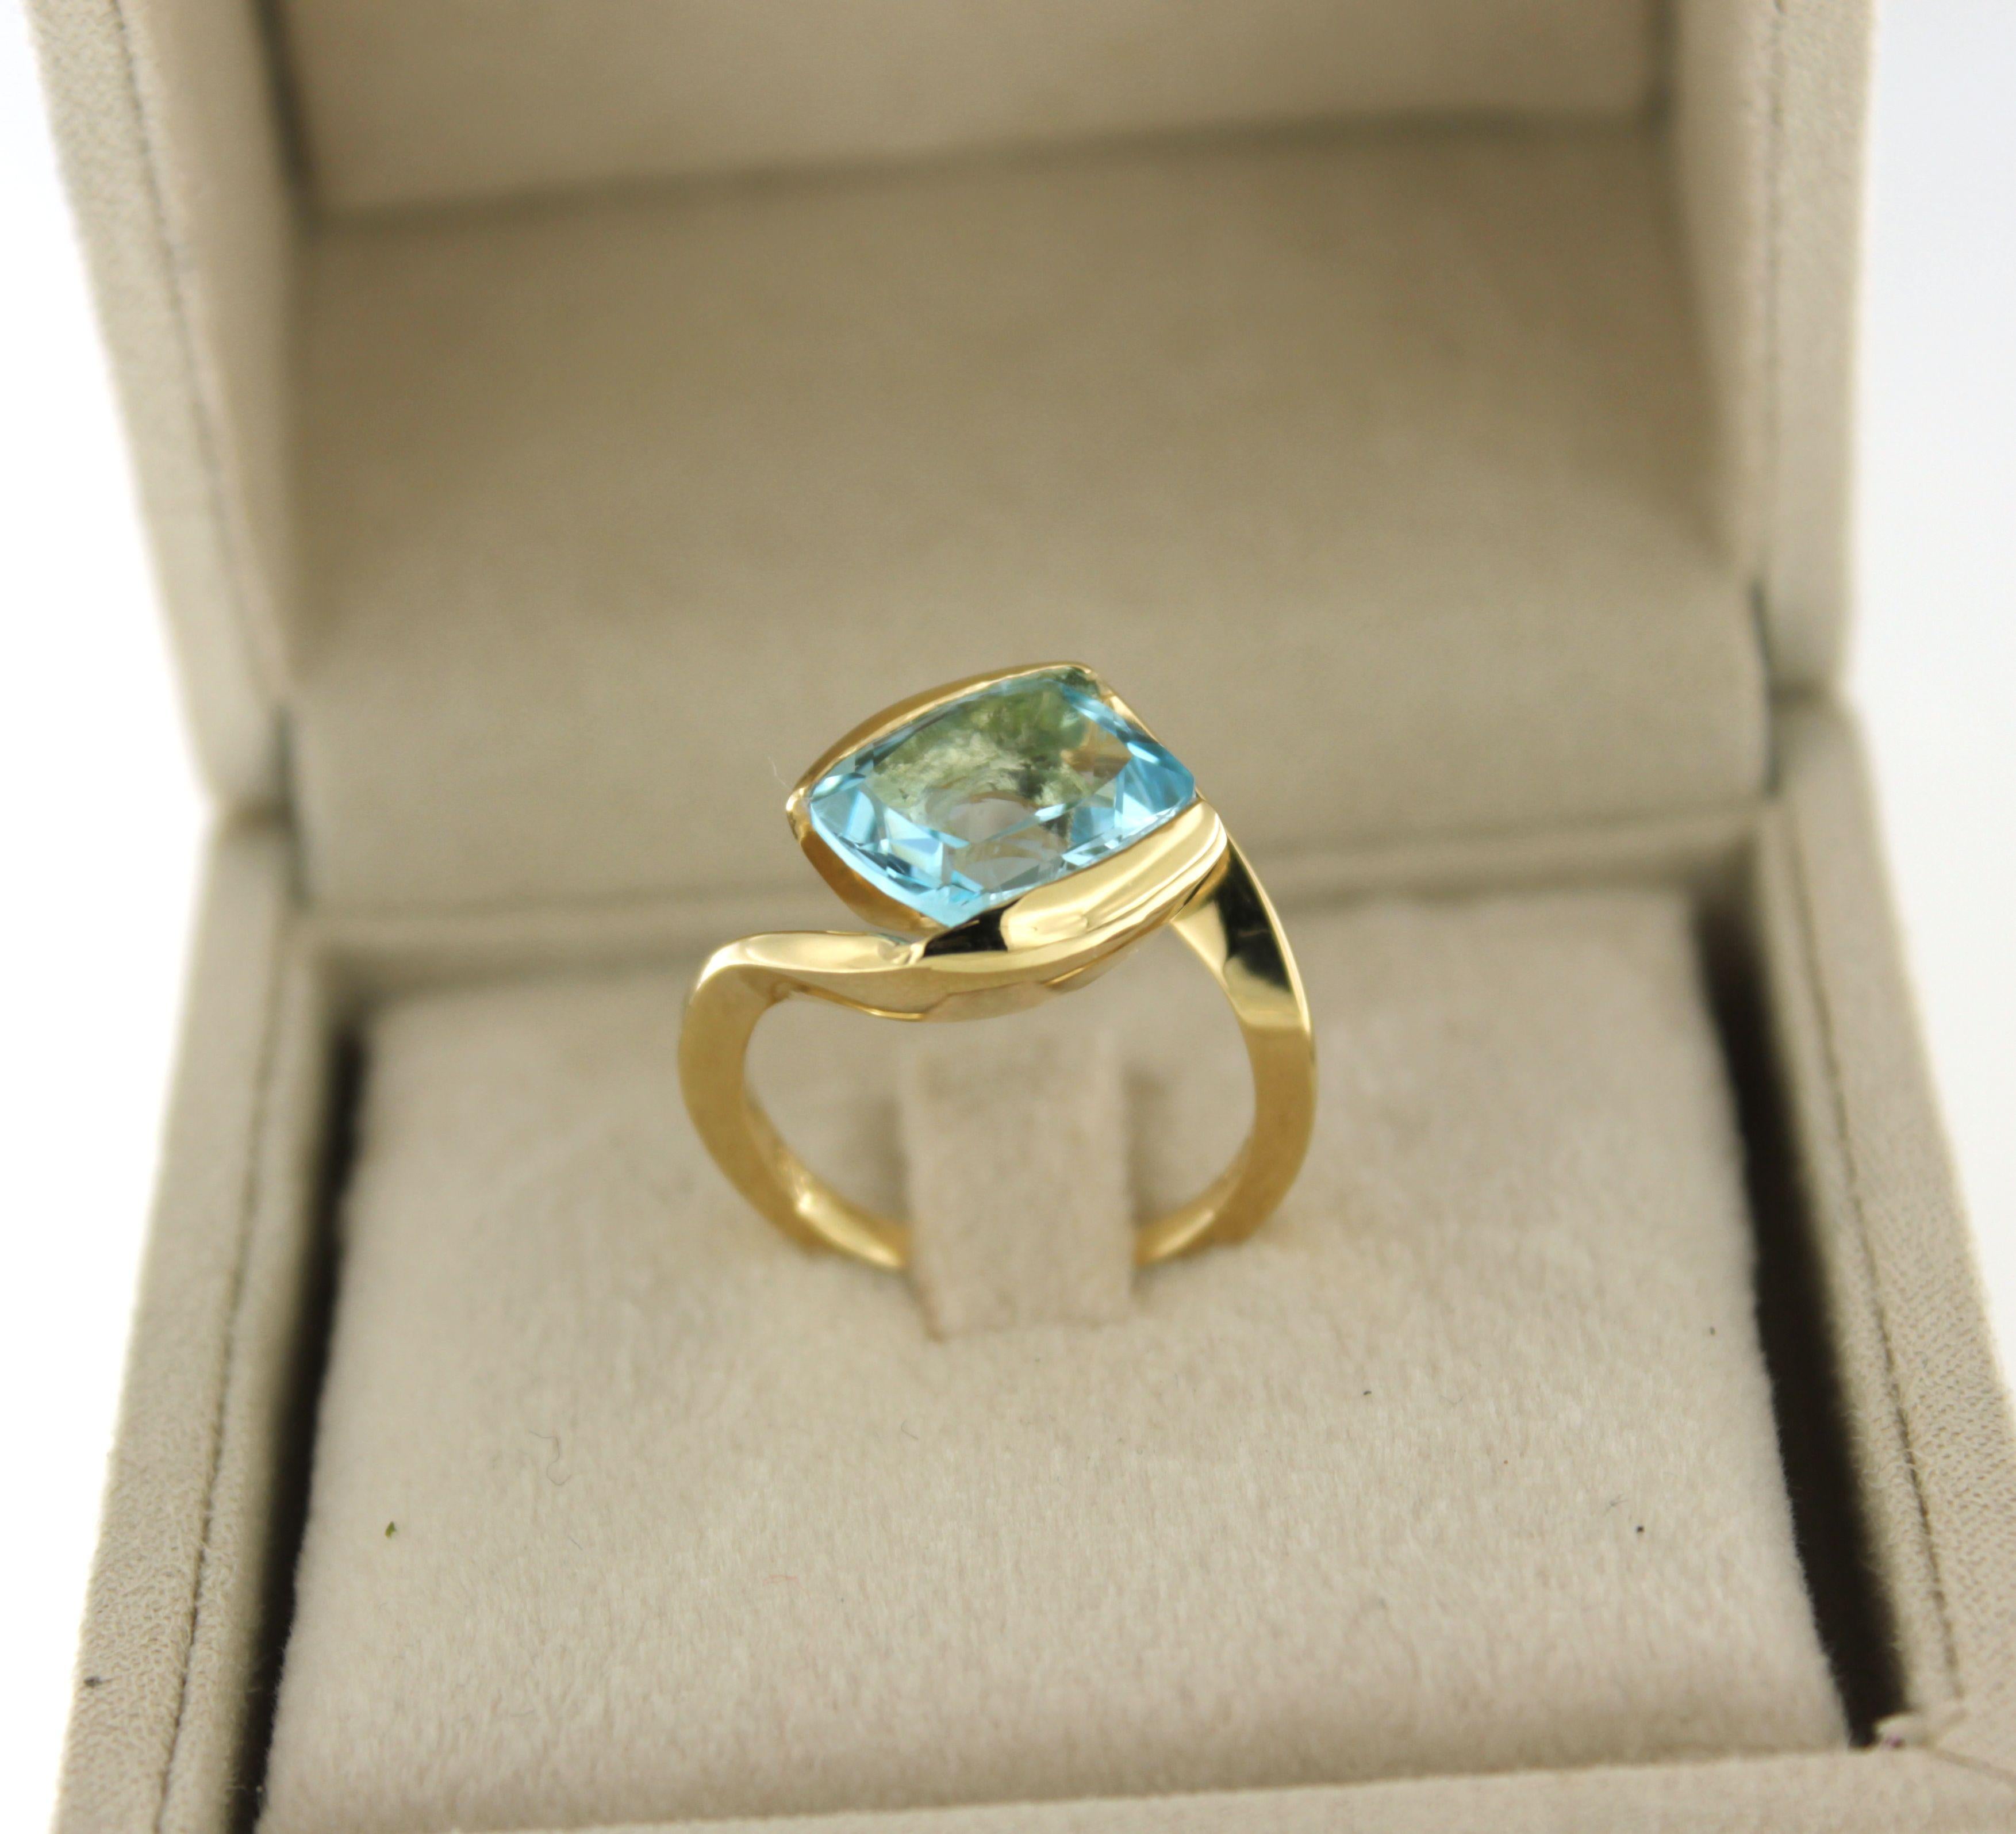 Special ring in yellow gold 18kt with natural stone blue topaz  soft lines that caress your hand, ideal for every day or for a party . A ring with blue topaz is an ideal gift, the blue stone takes away stress and gives positivity.
All our jewels are